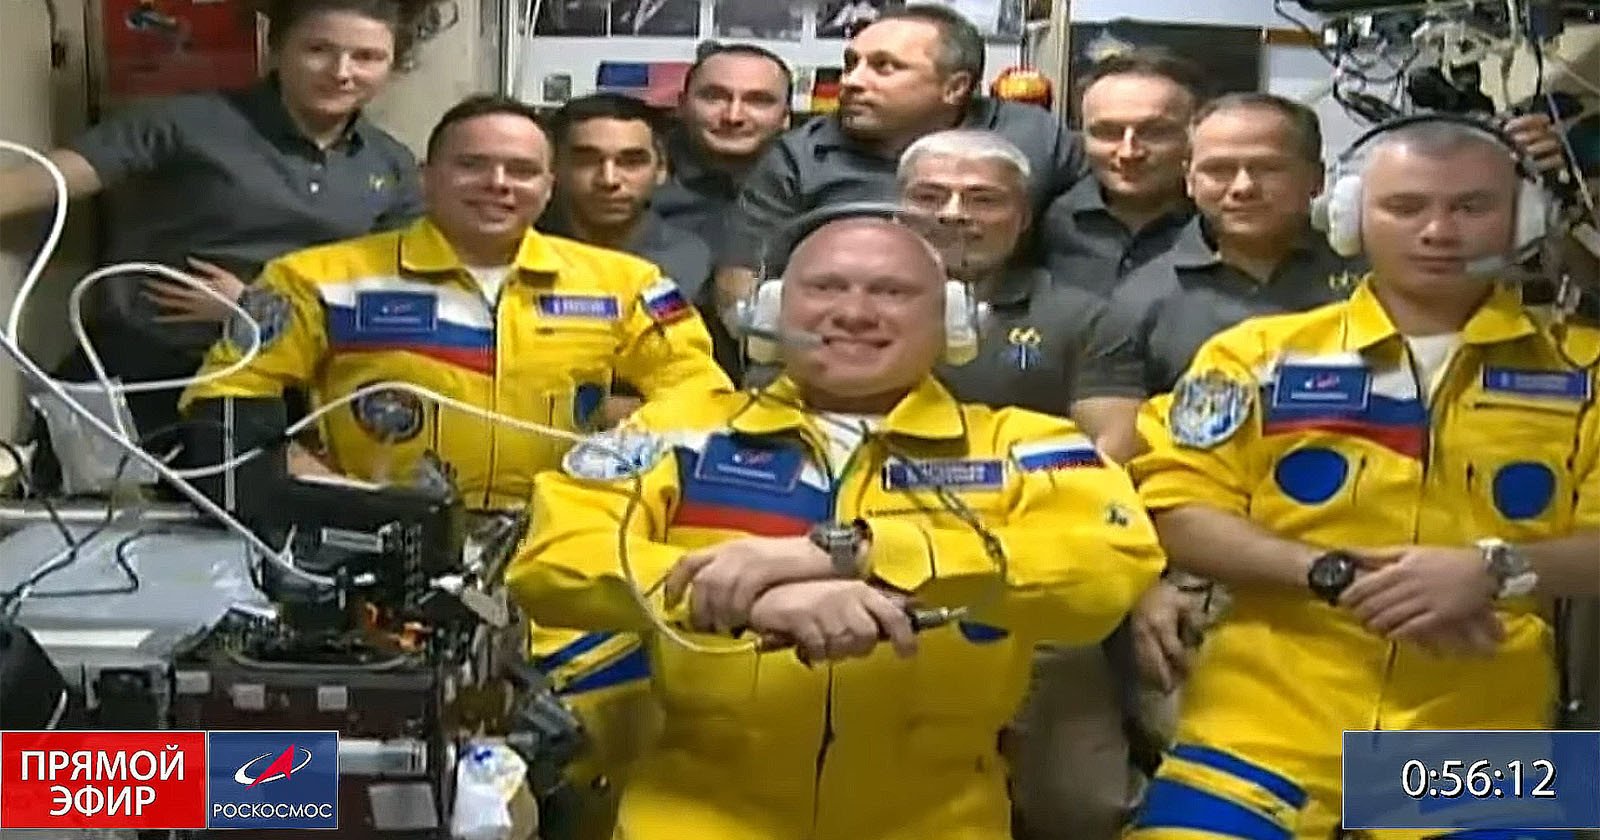 Russian Cosmonauts Arrive at ISS in Colors of Ukrainian Flag